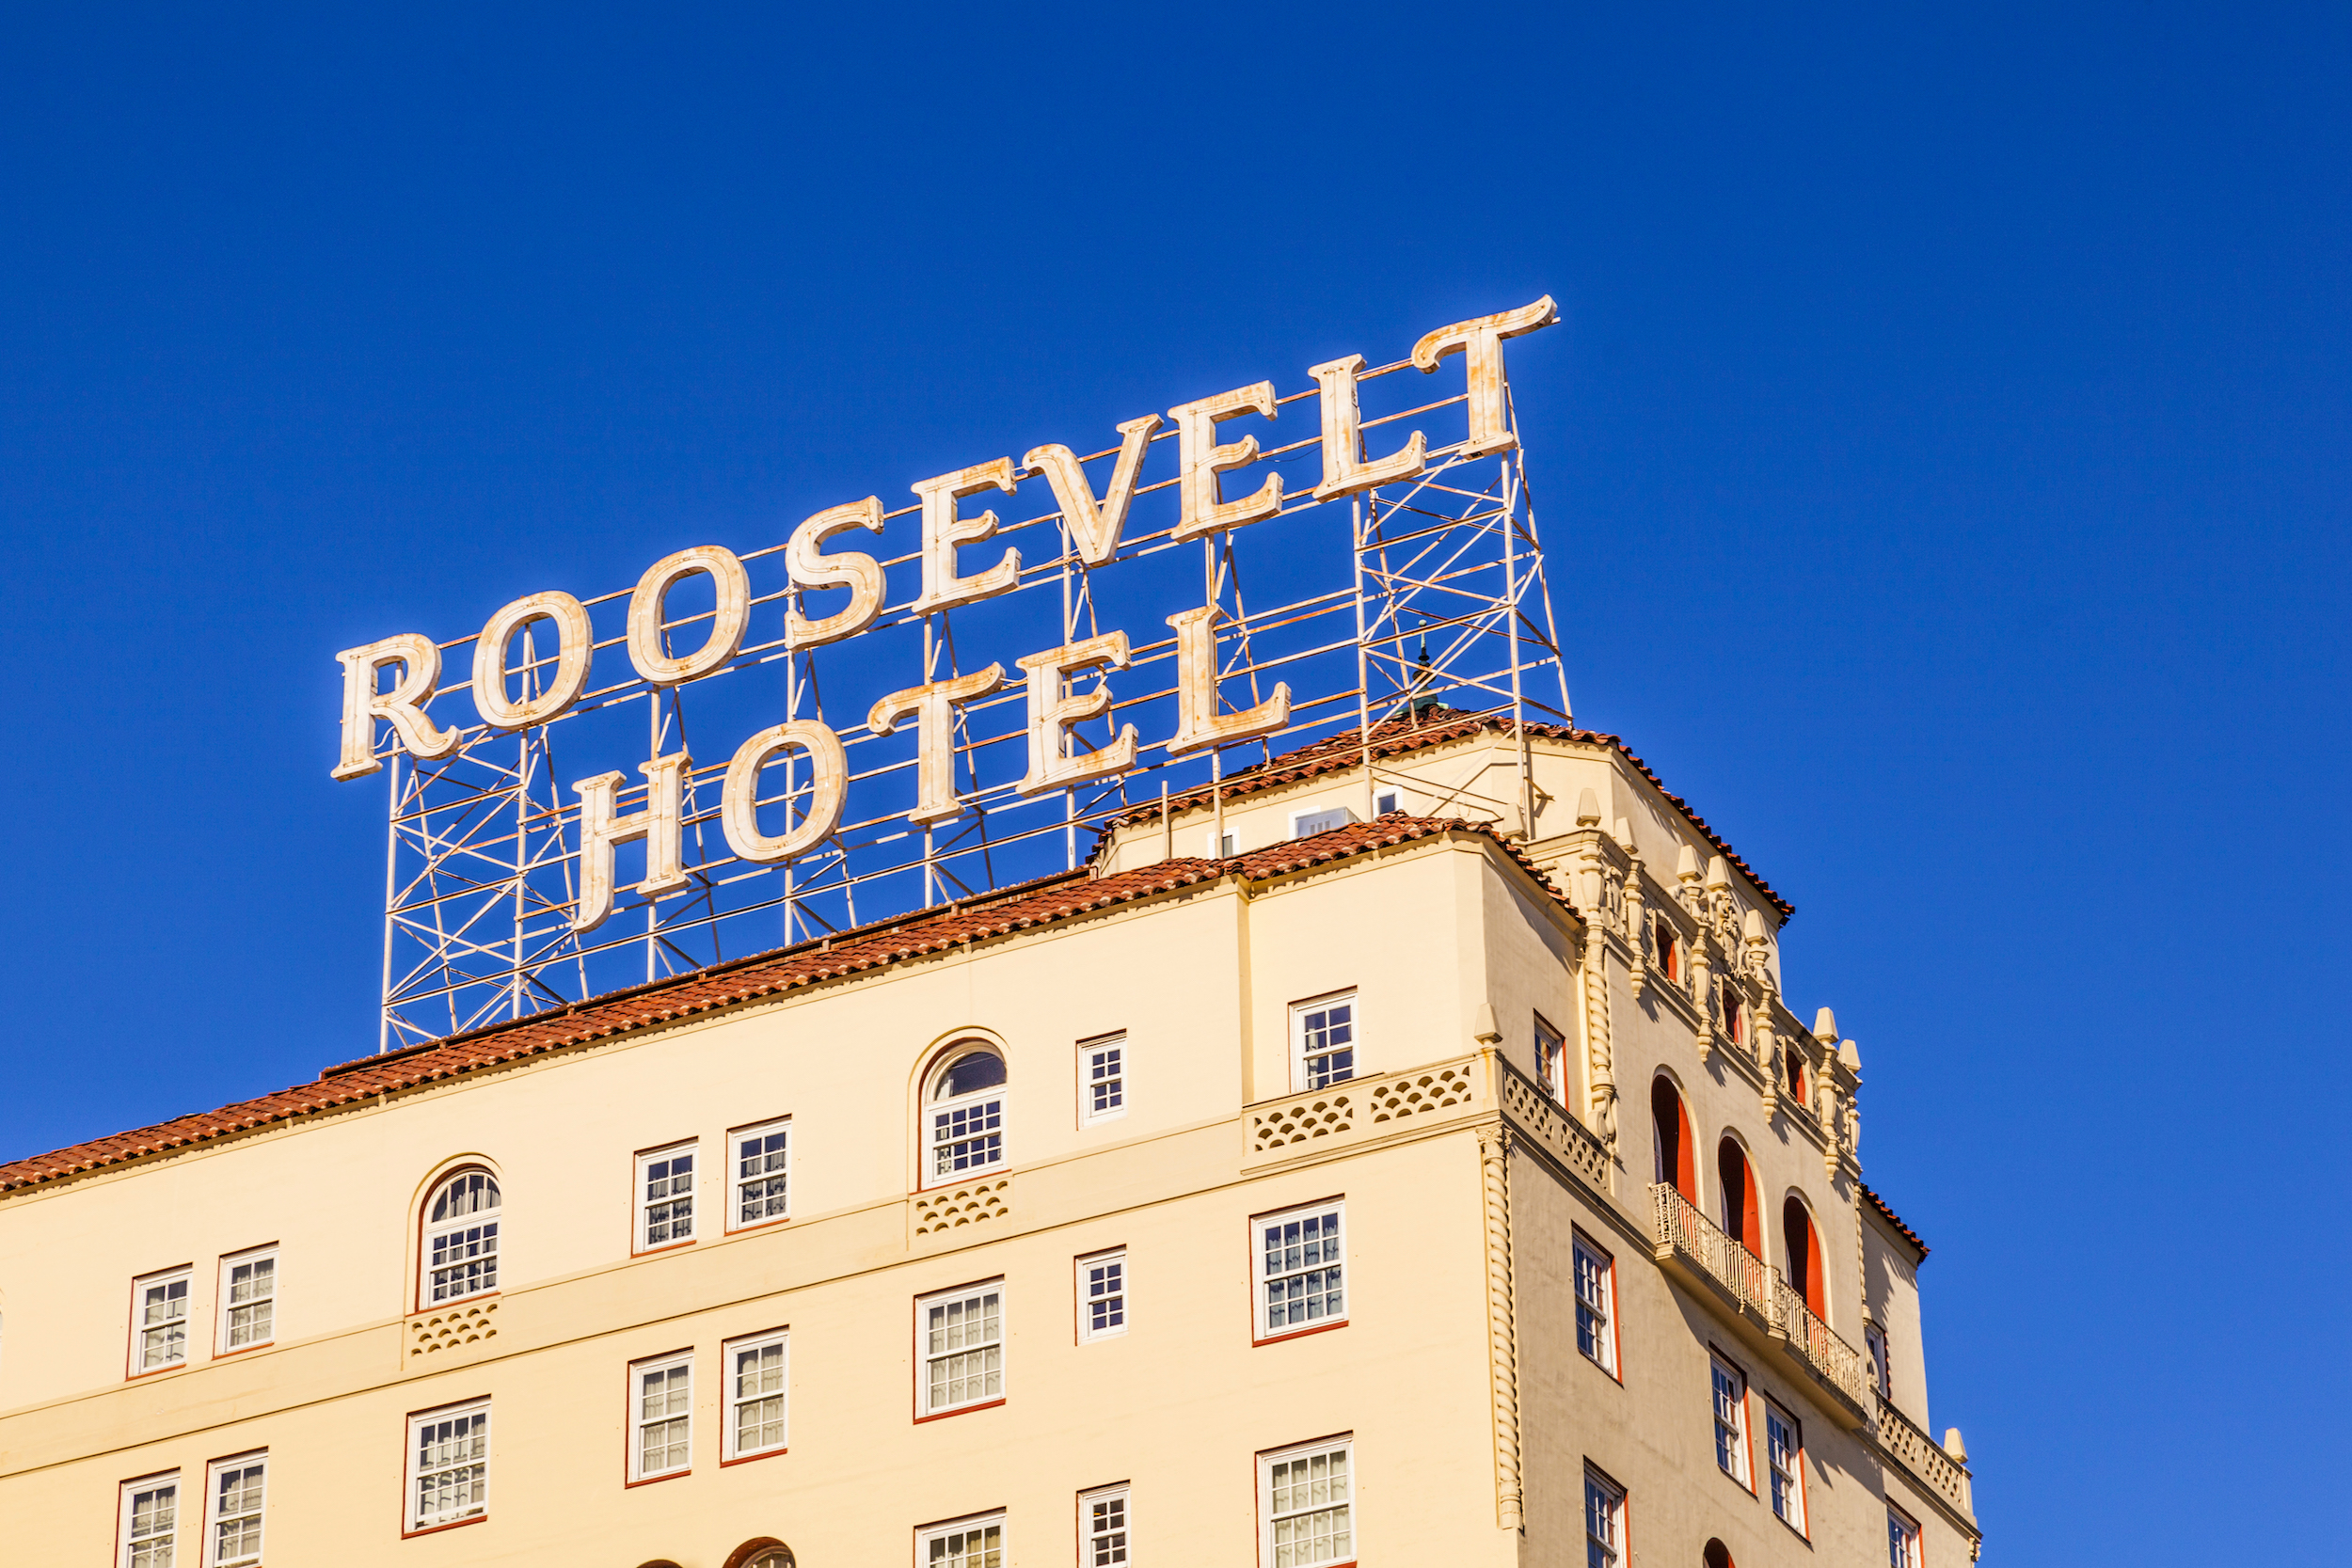 facade of famous historic Roosevelt Hotel